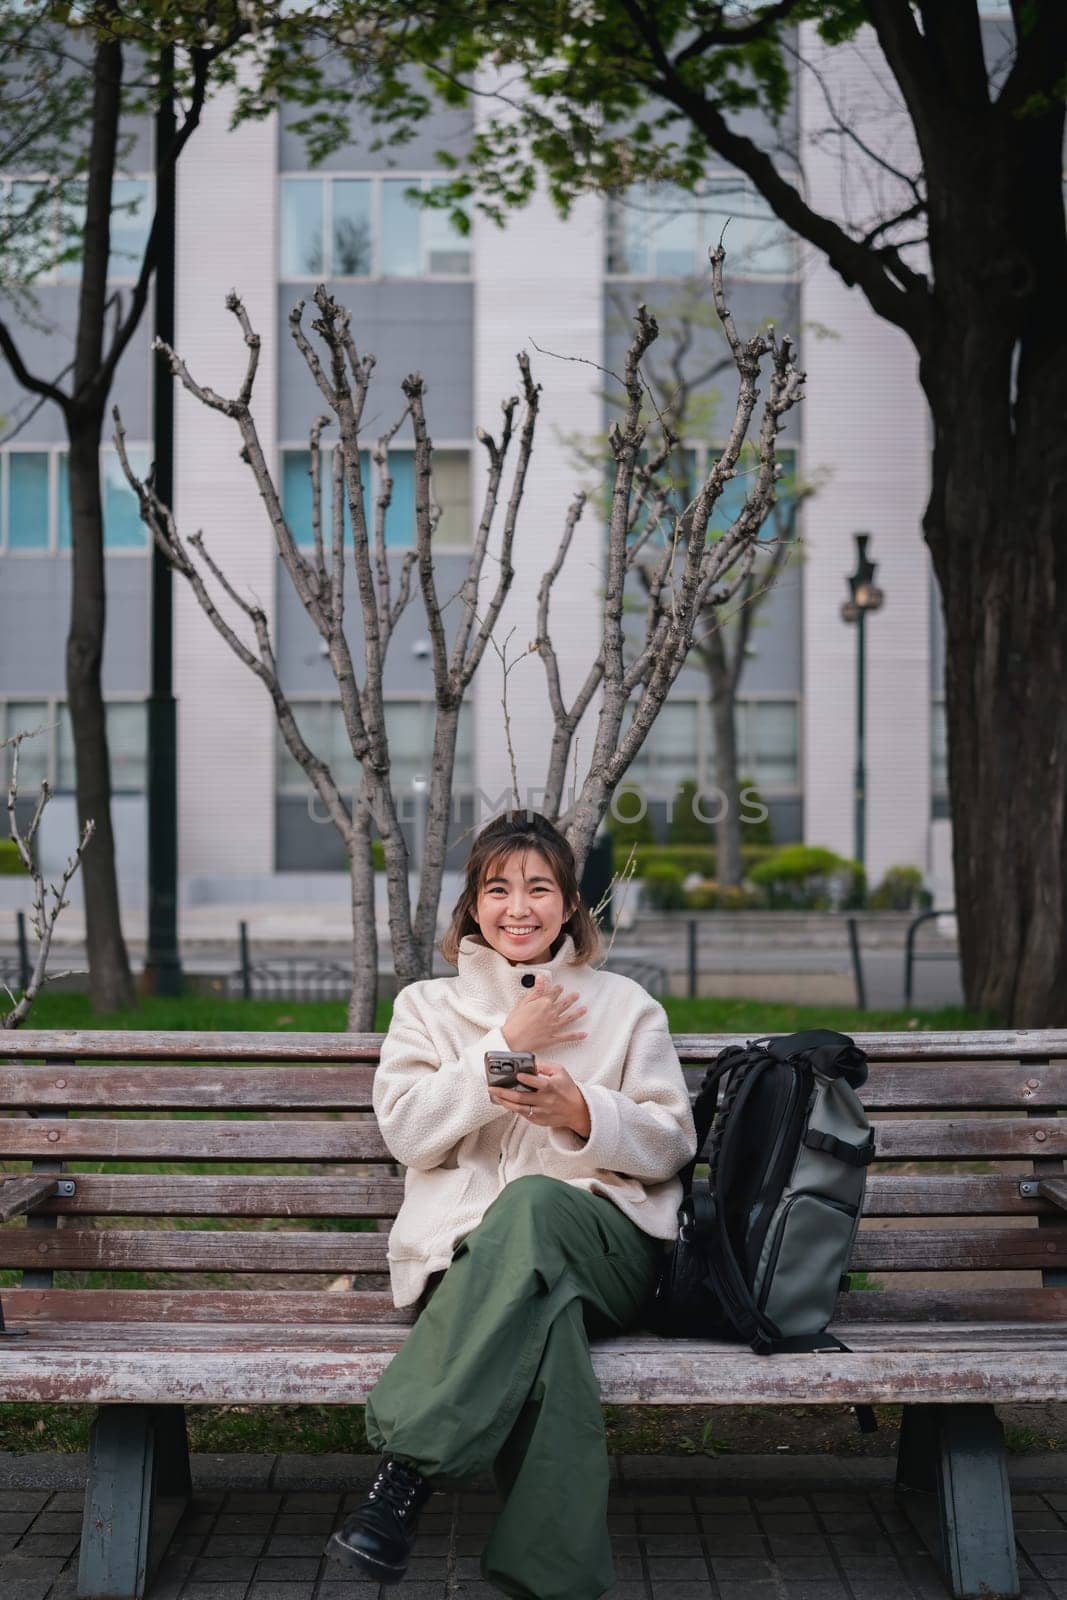 Woman sitting on a park bench smiling while using a smartphone with a backpack. Concept of outdoor relaxation and digital connectivity by wichayada